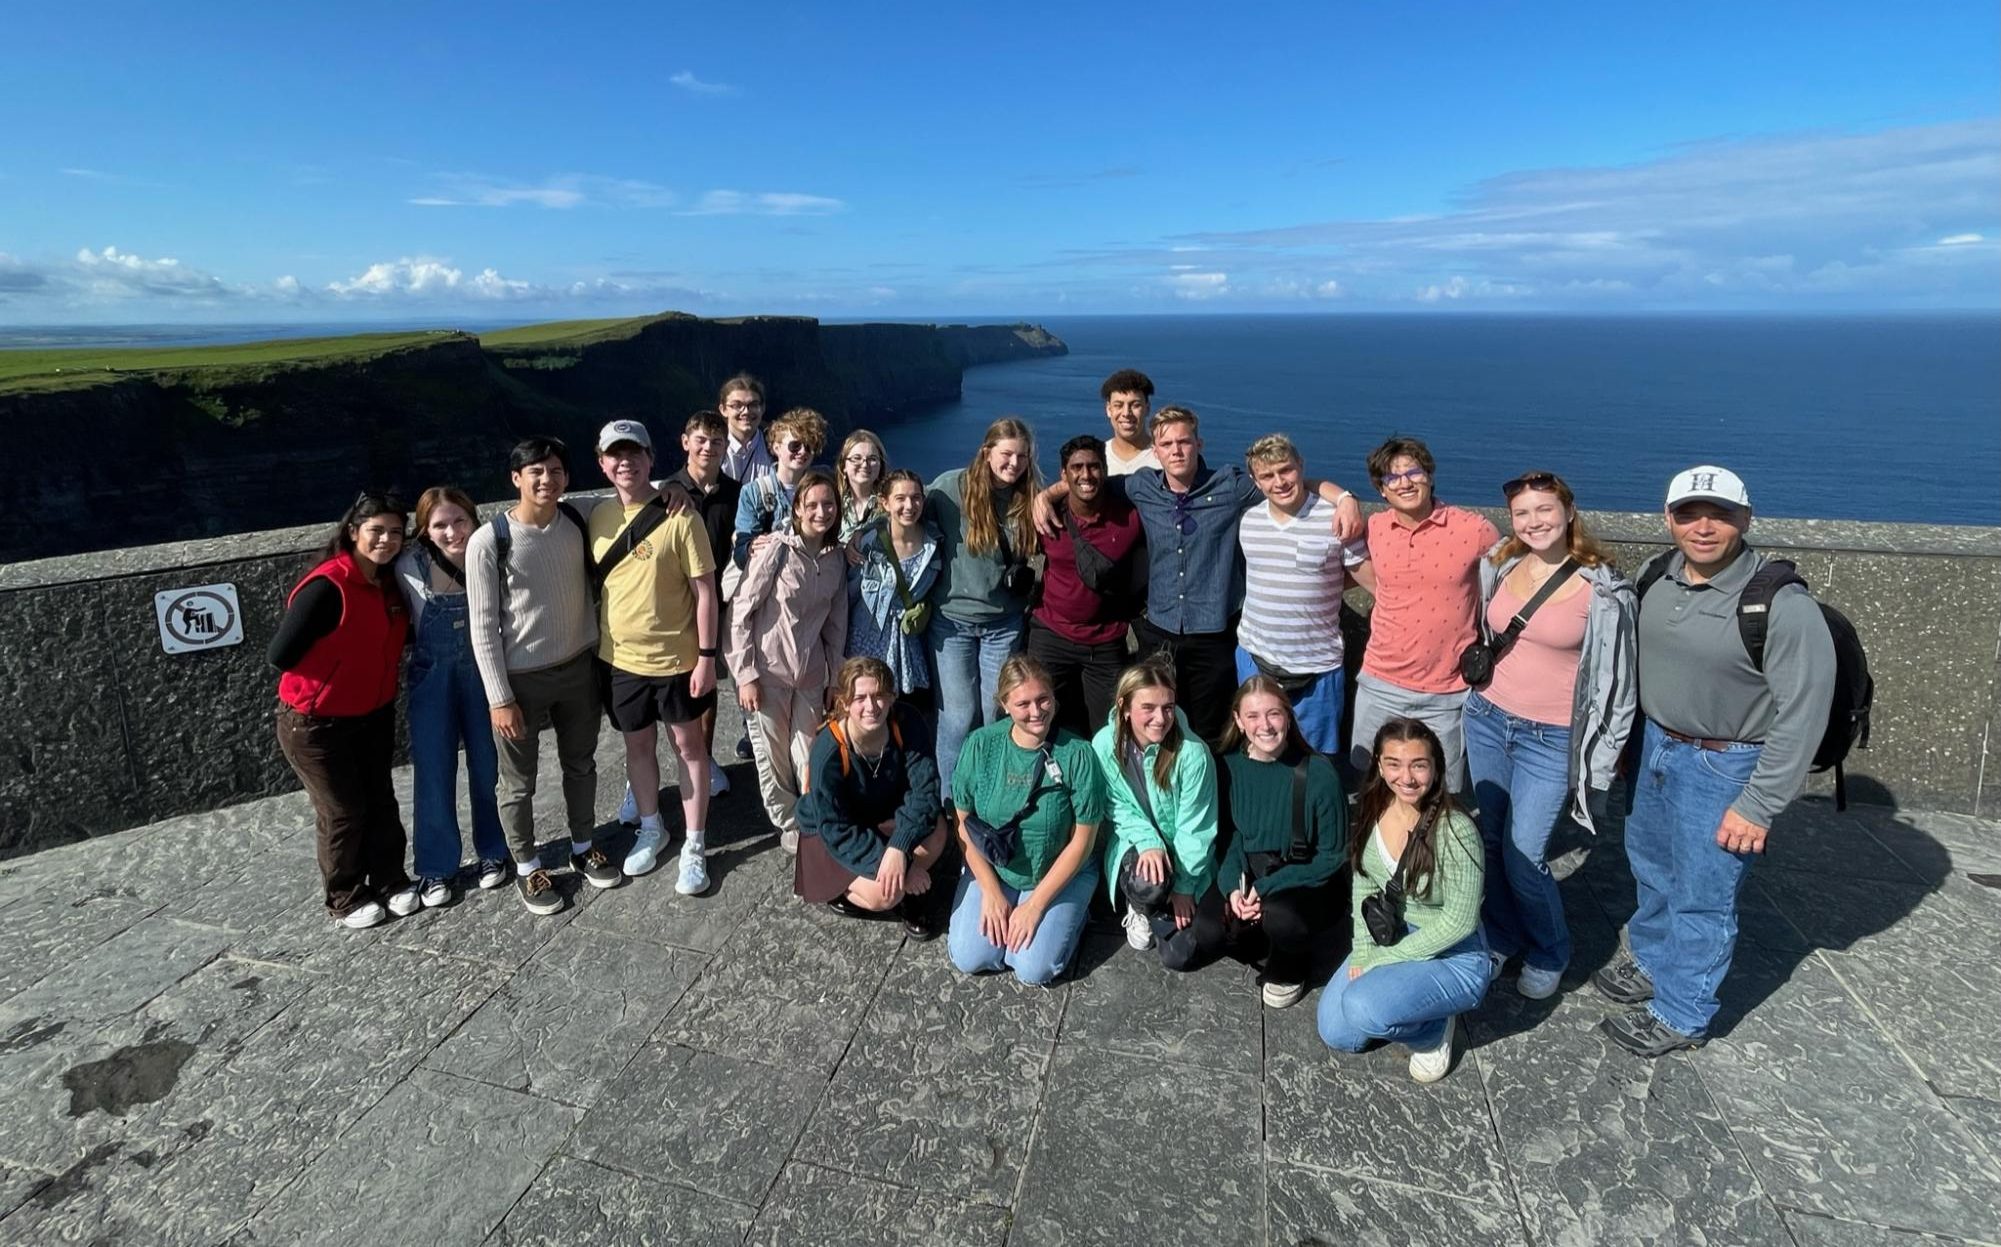 Hudson High Schools Chamber Choir views the Cliffs of Moher in County Clare, Ireland. Used with permission/Jacob Moore.